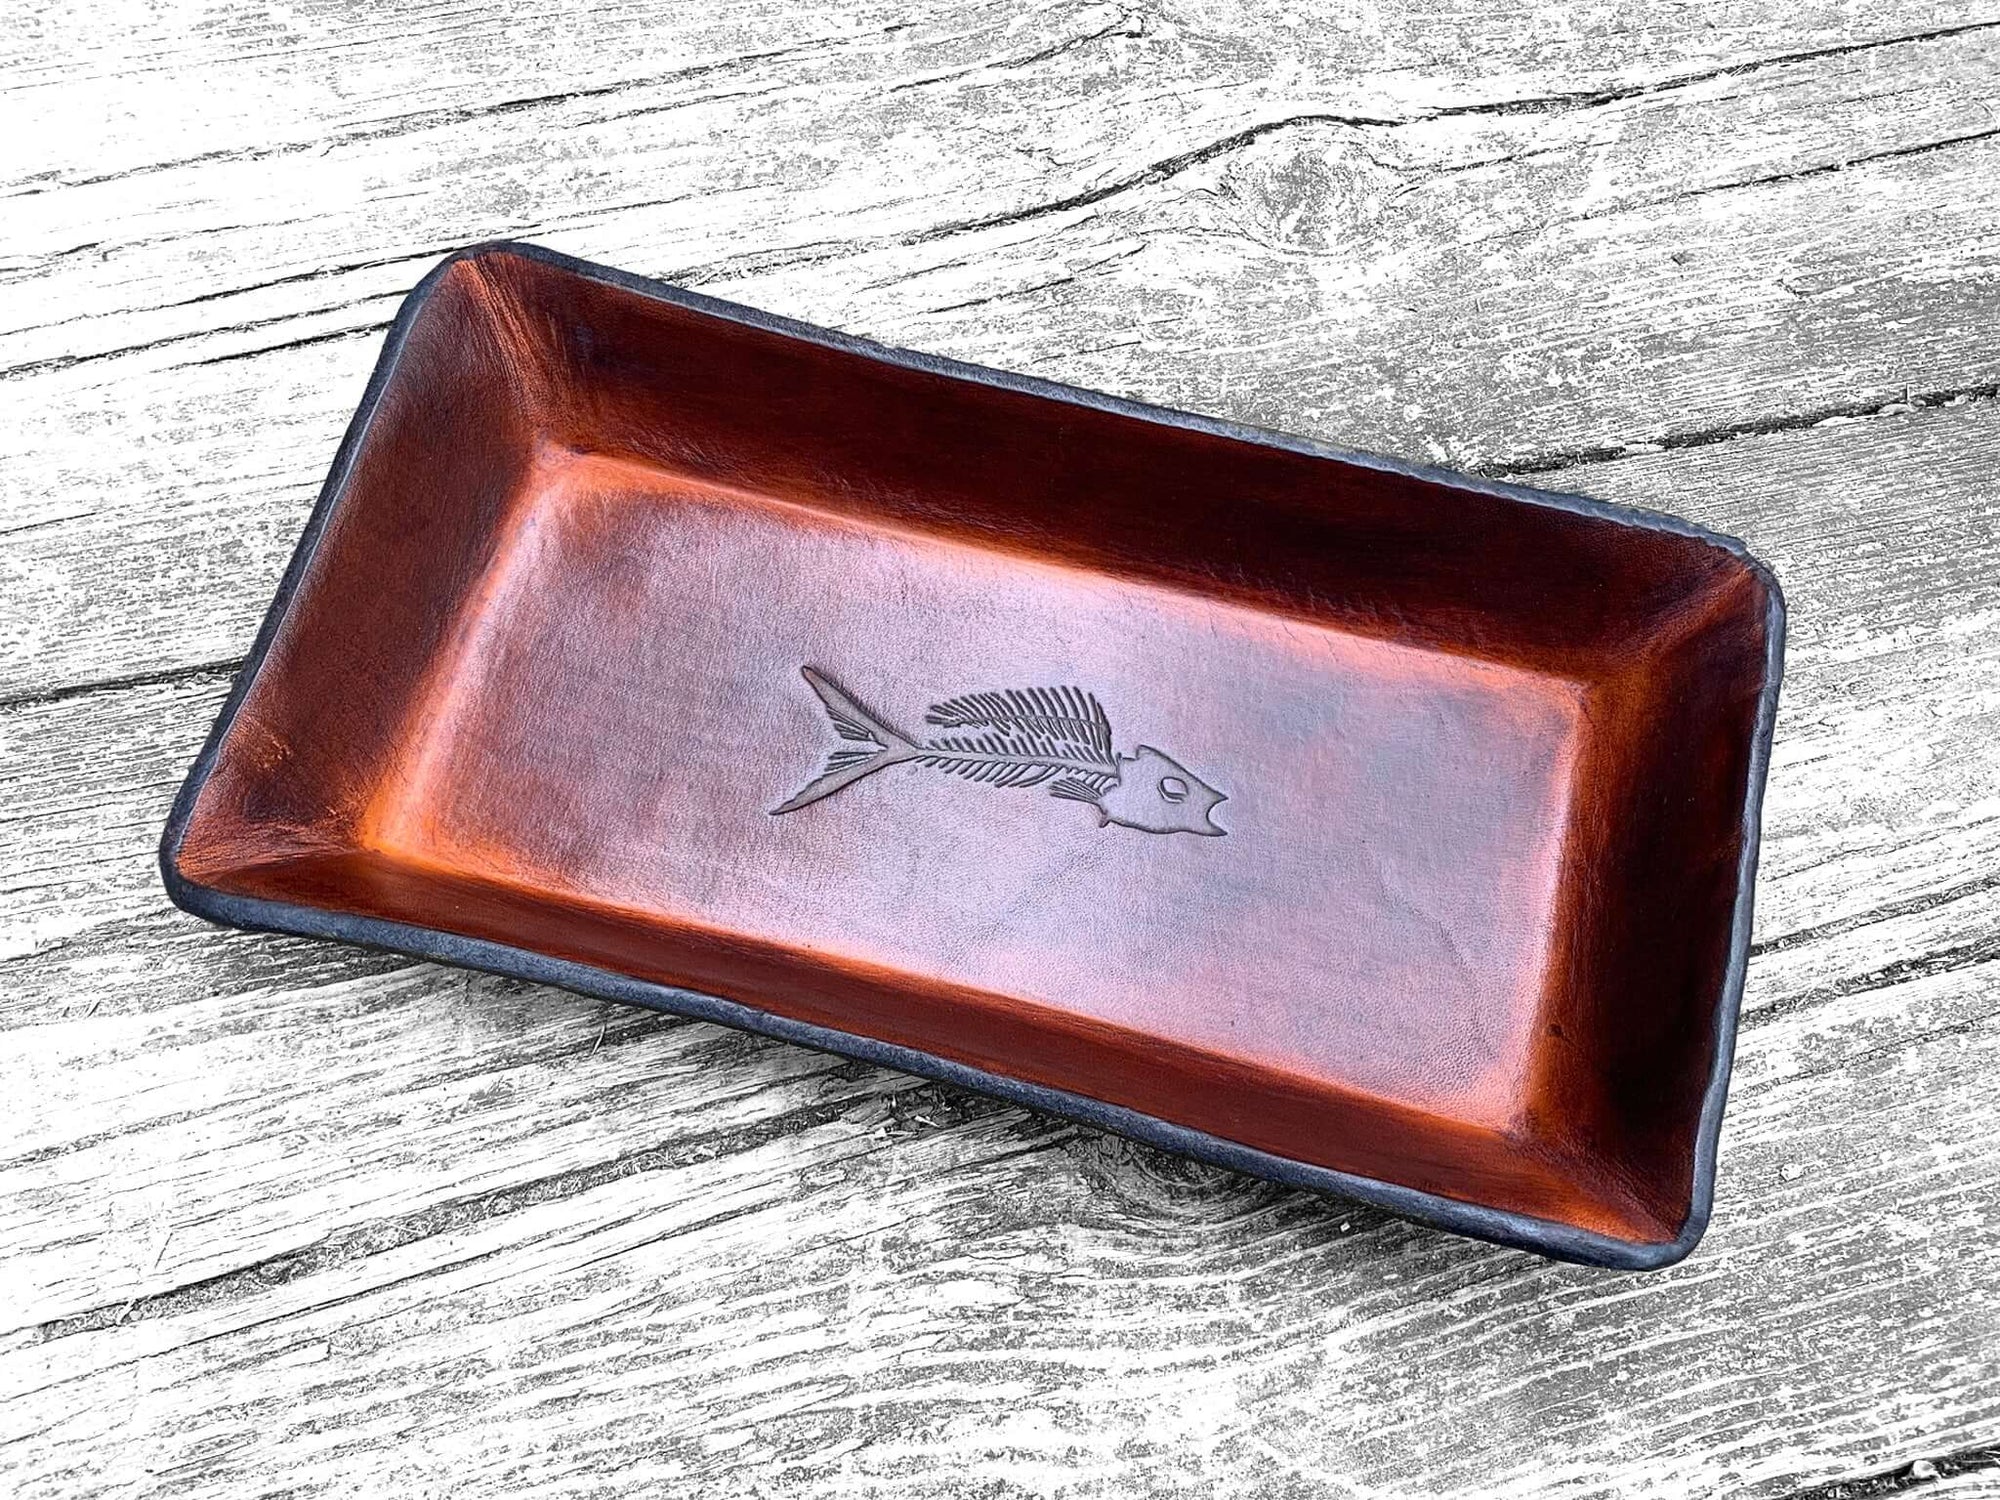 Our Leather Valet with Fossil Fish Motif Makes a Rustic Statement